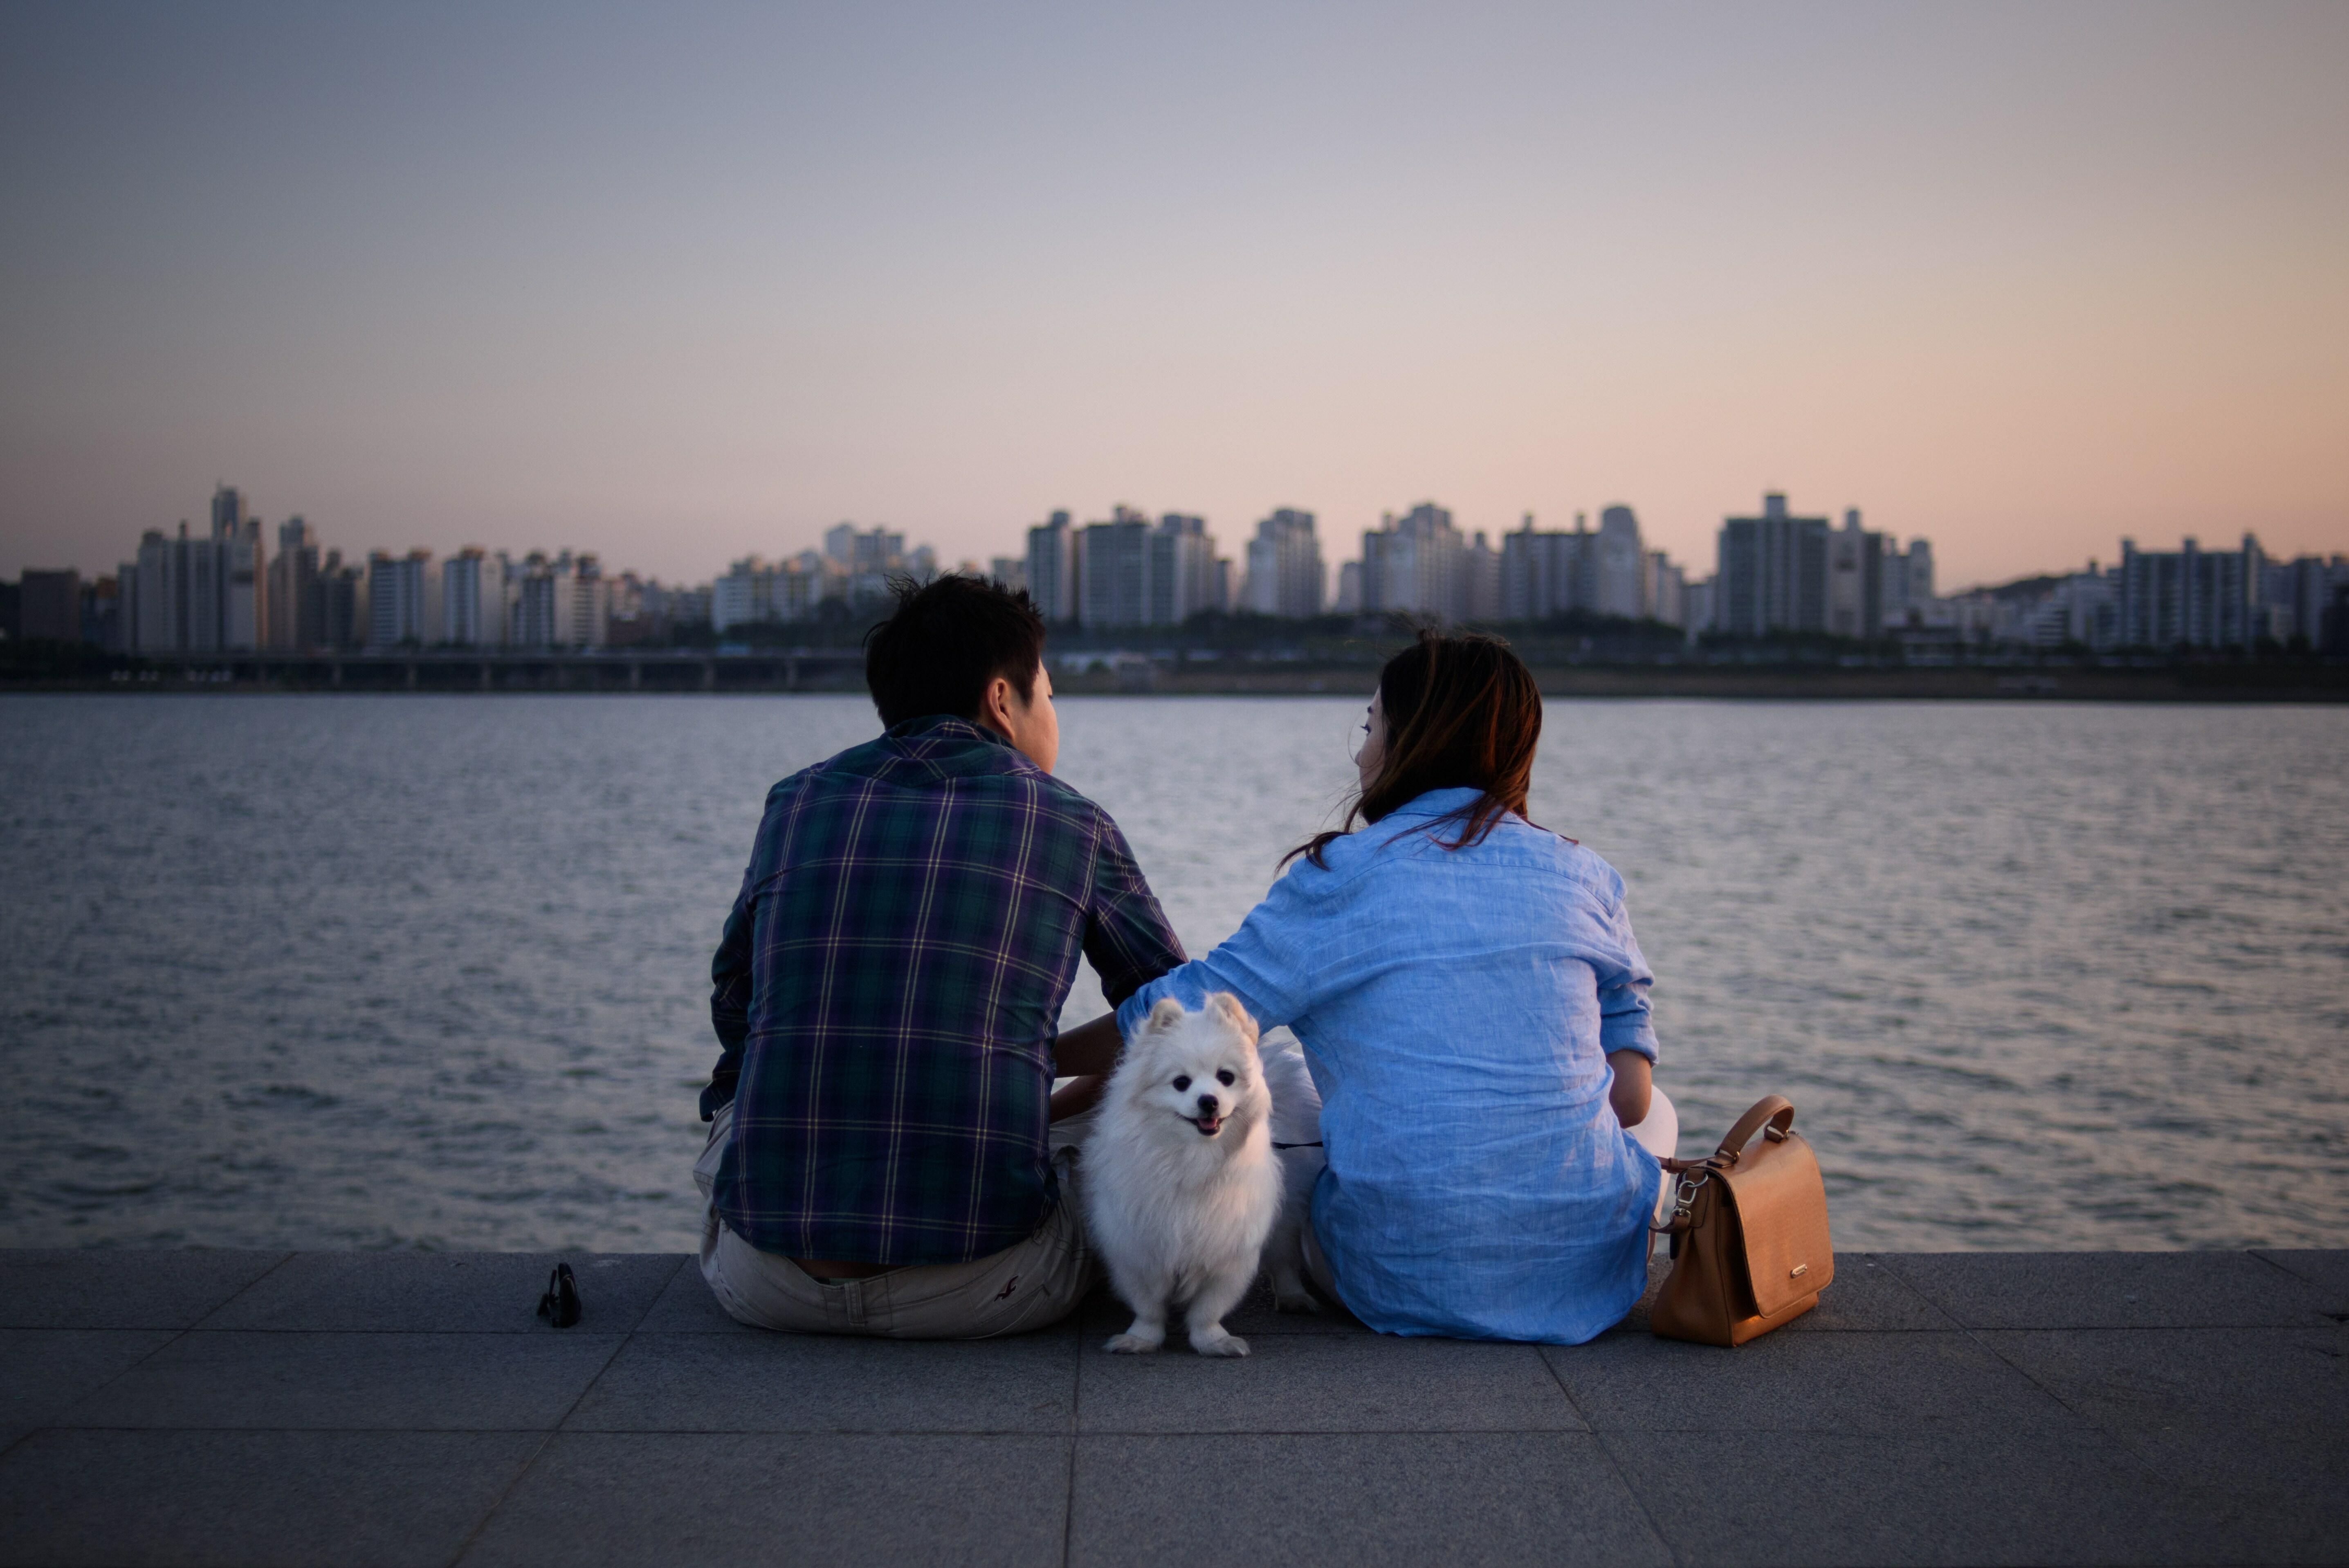 A dog stands between a couple as they sit before the Han river in Seoul on September 20, 2015.  The Han river intersects Seoul from East to West and is lined with parks and walkways making the waterway a popular leisure area throughout the year.  AFP PHOT